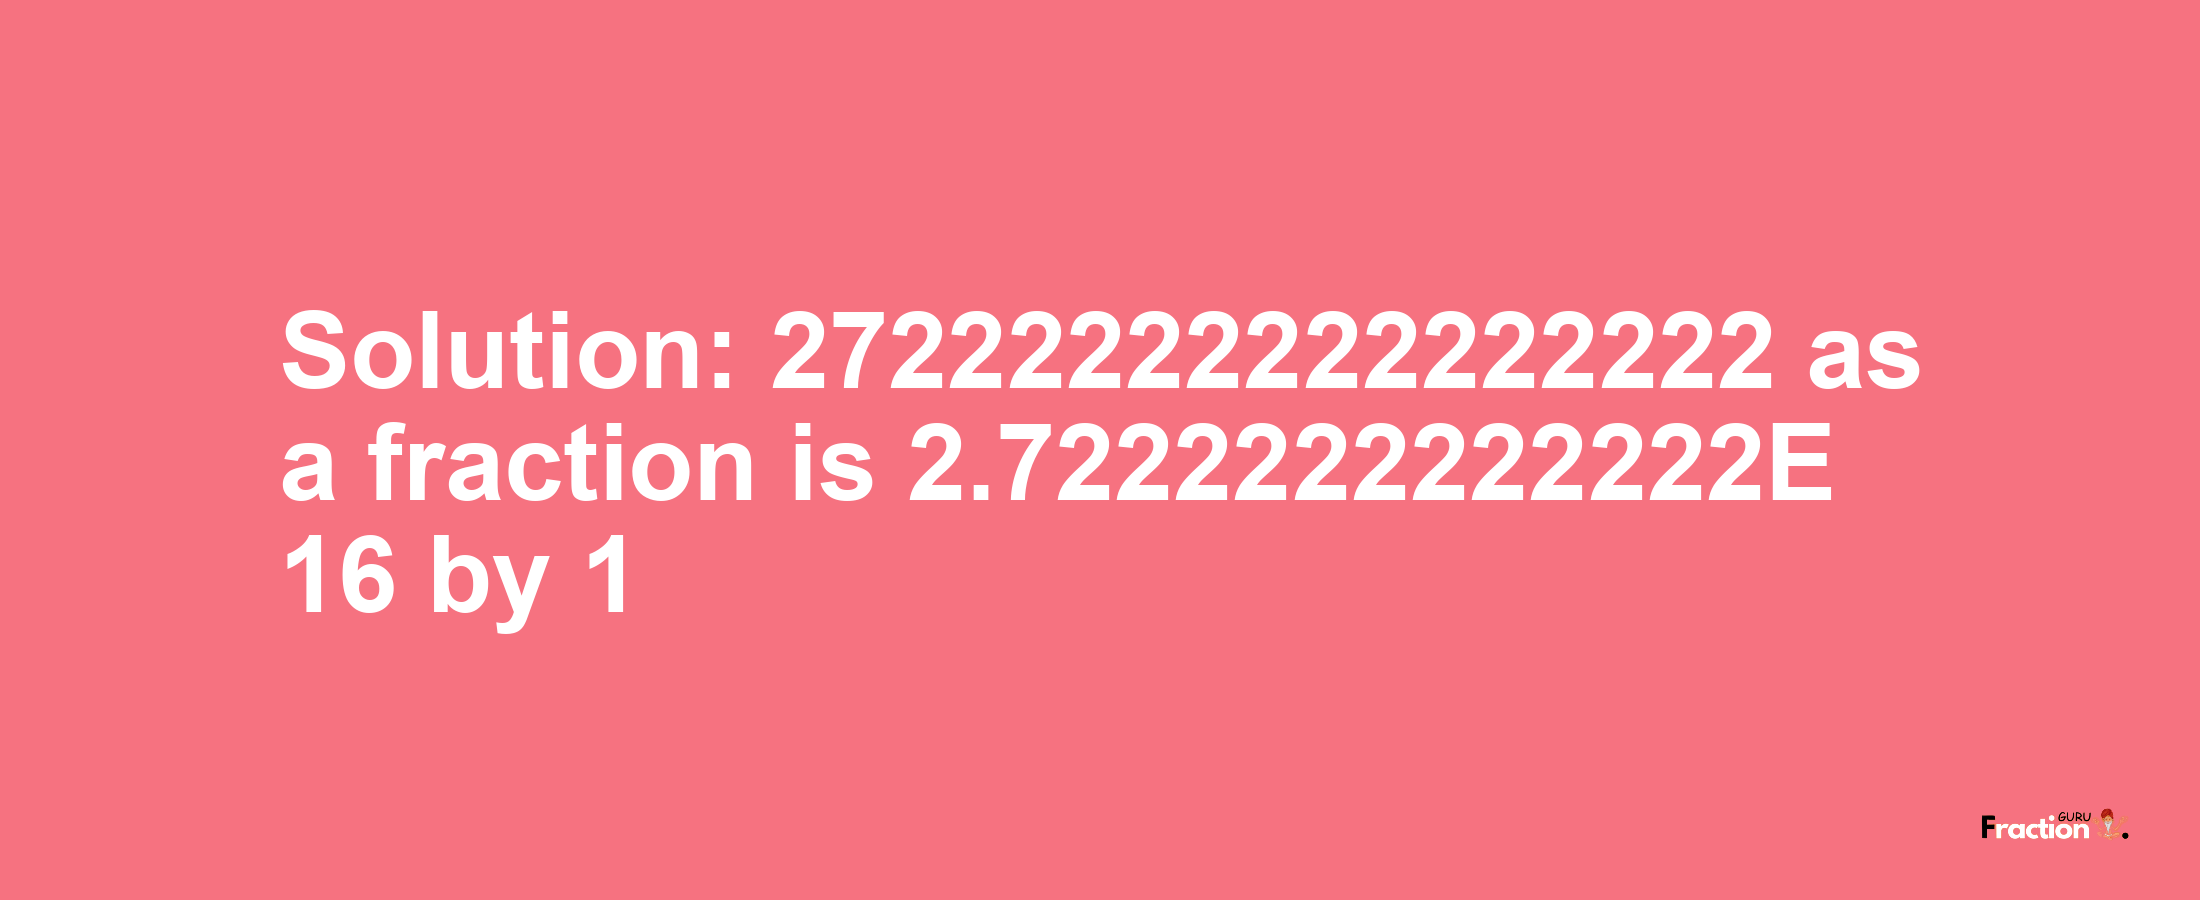 Solution:27222222222222222 as a fraction is 2.7222222222222E+16/1